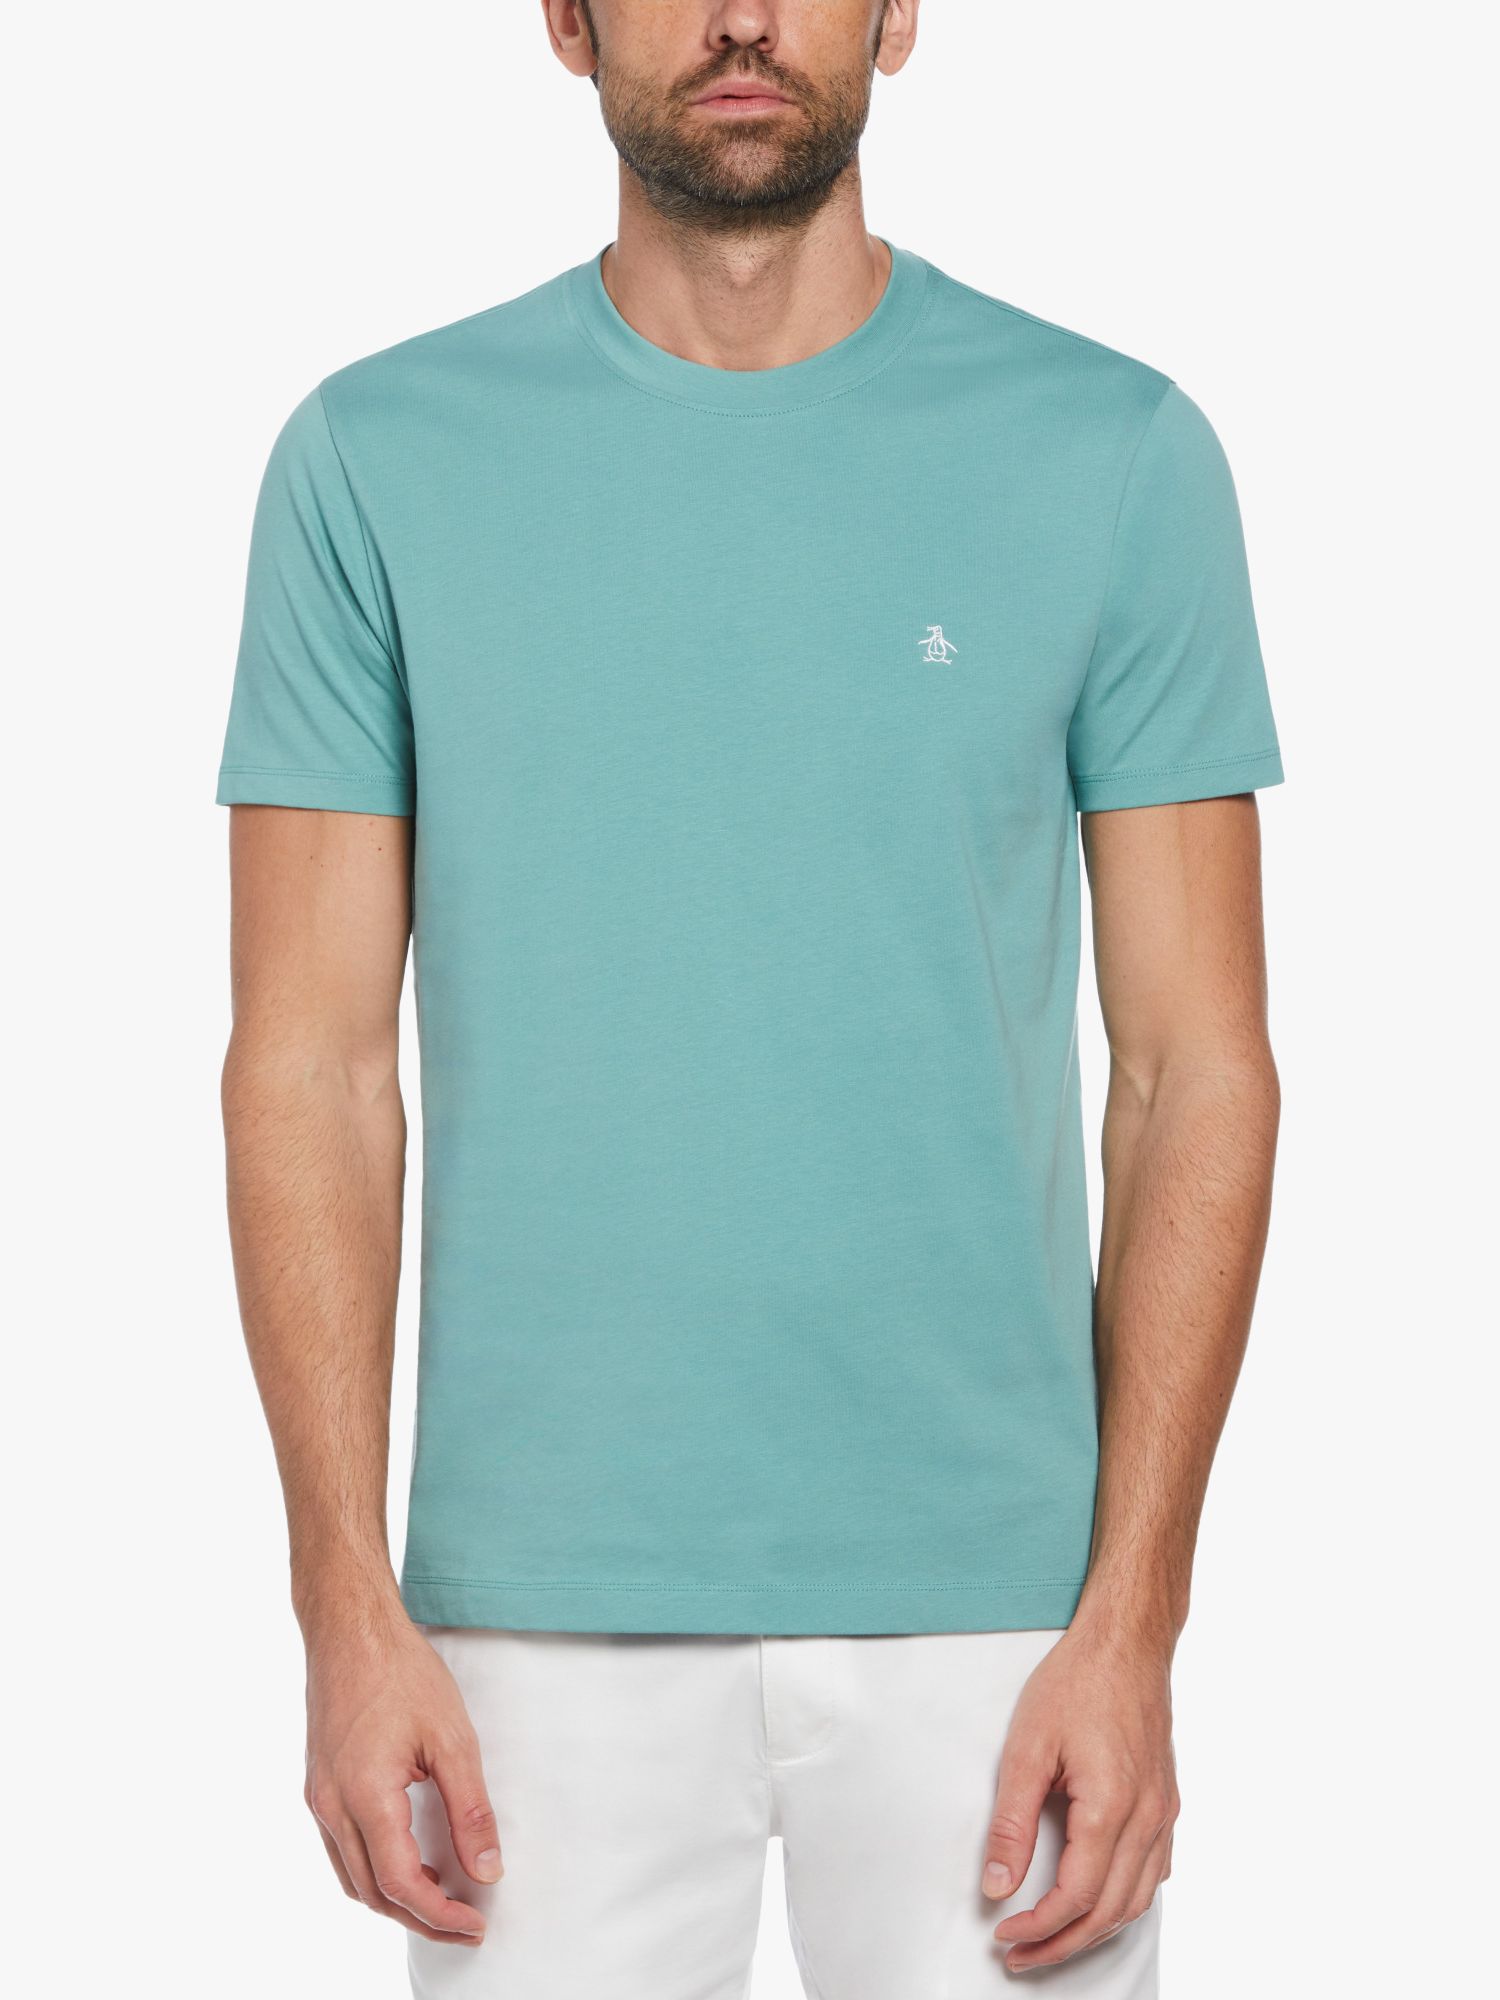 Original Penguin Pin Point Embroidery T-Shirt, Oil Blue, L